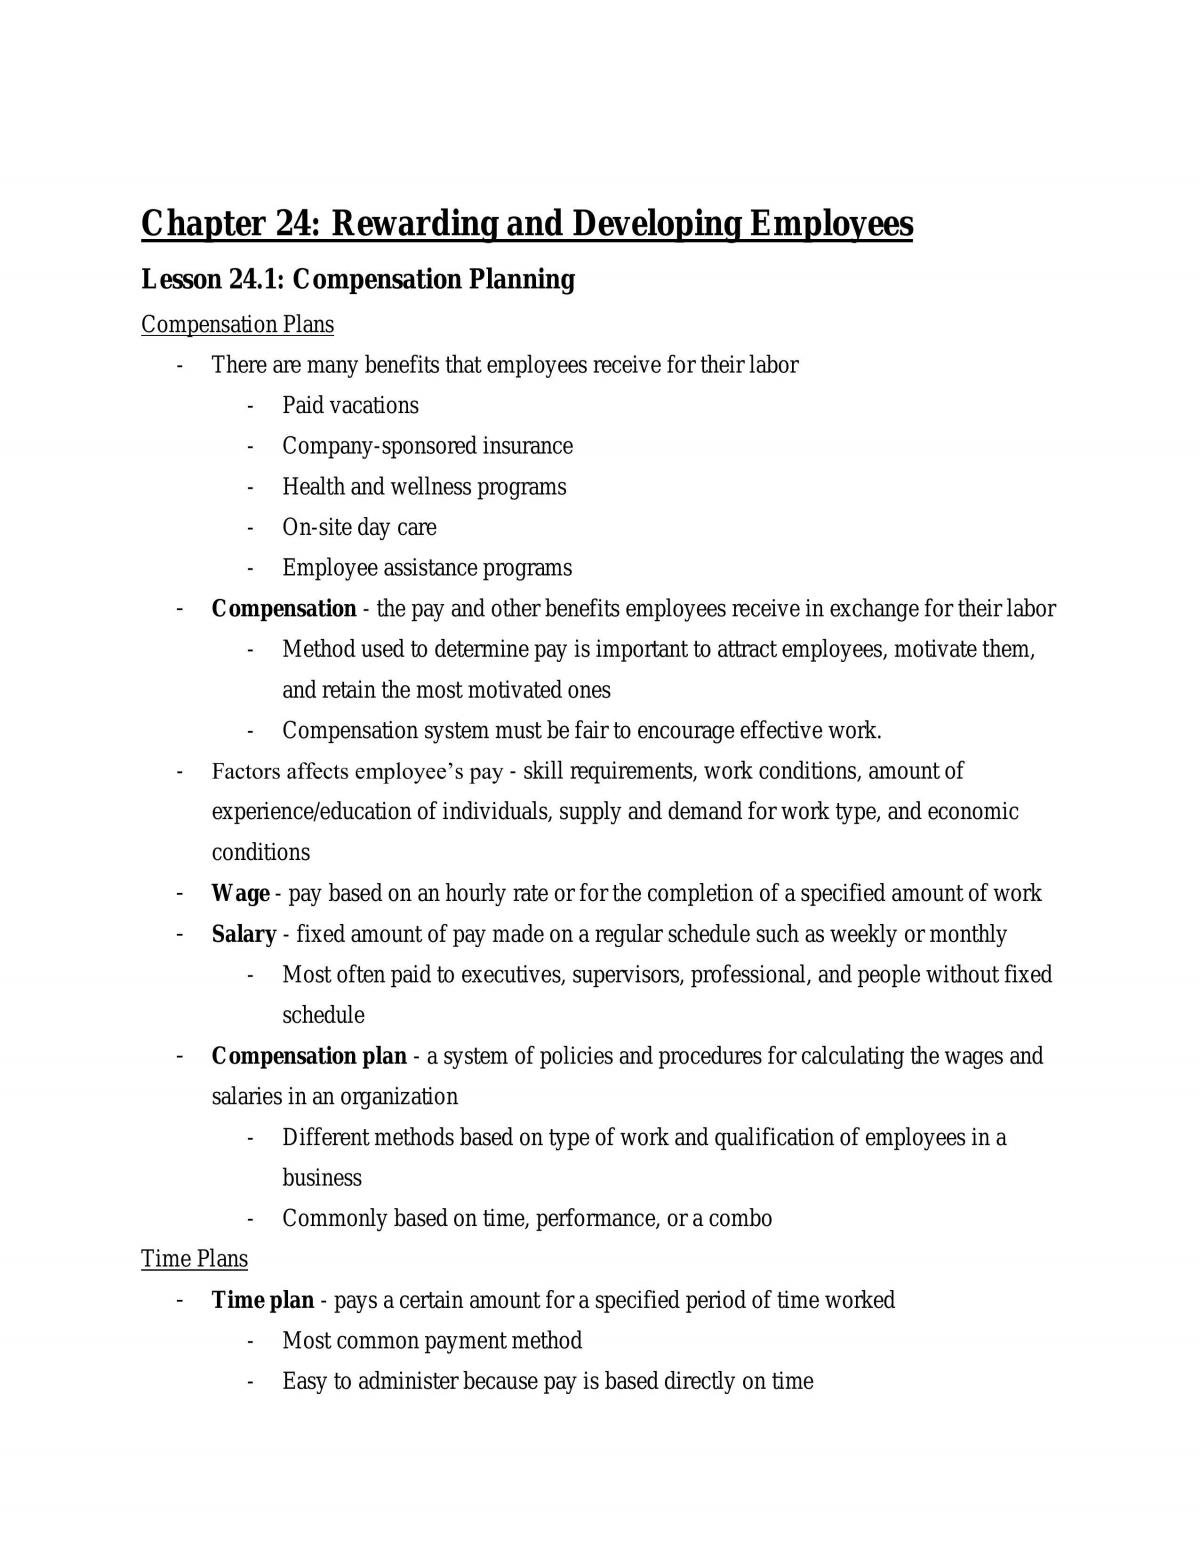 Business Organization and Management 120 Notes - Page 89